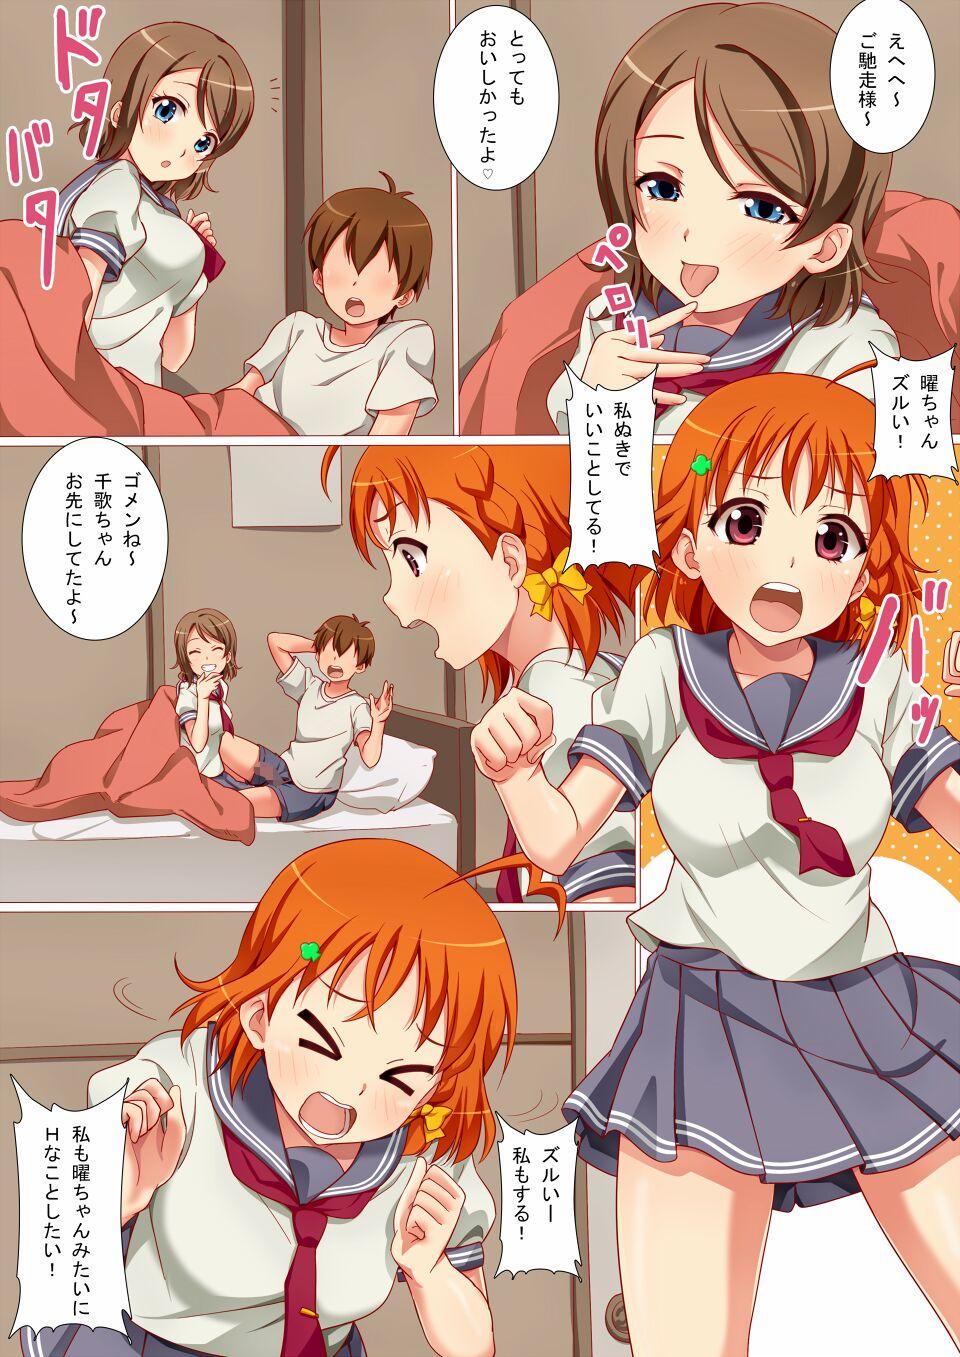 Black Morning flirting between two people - Love live sunshine Wet Cunts - Page 6